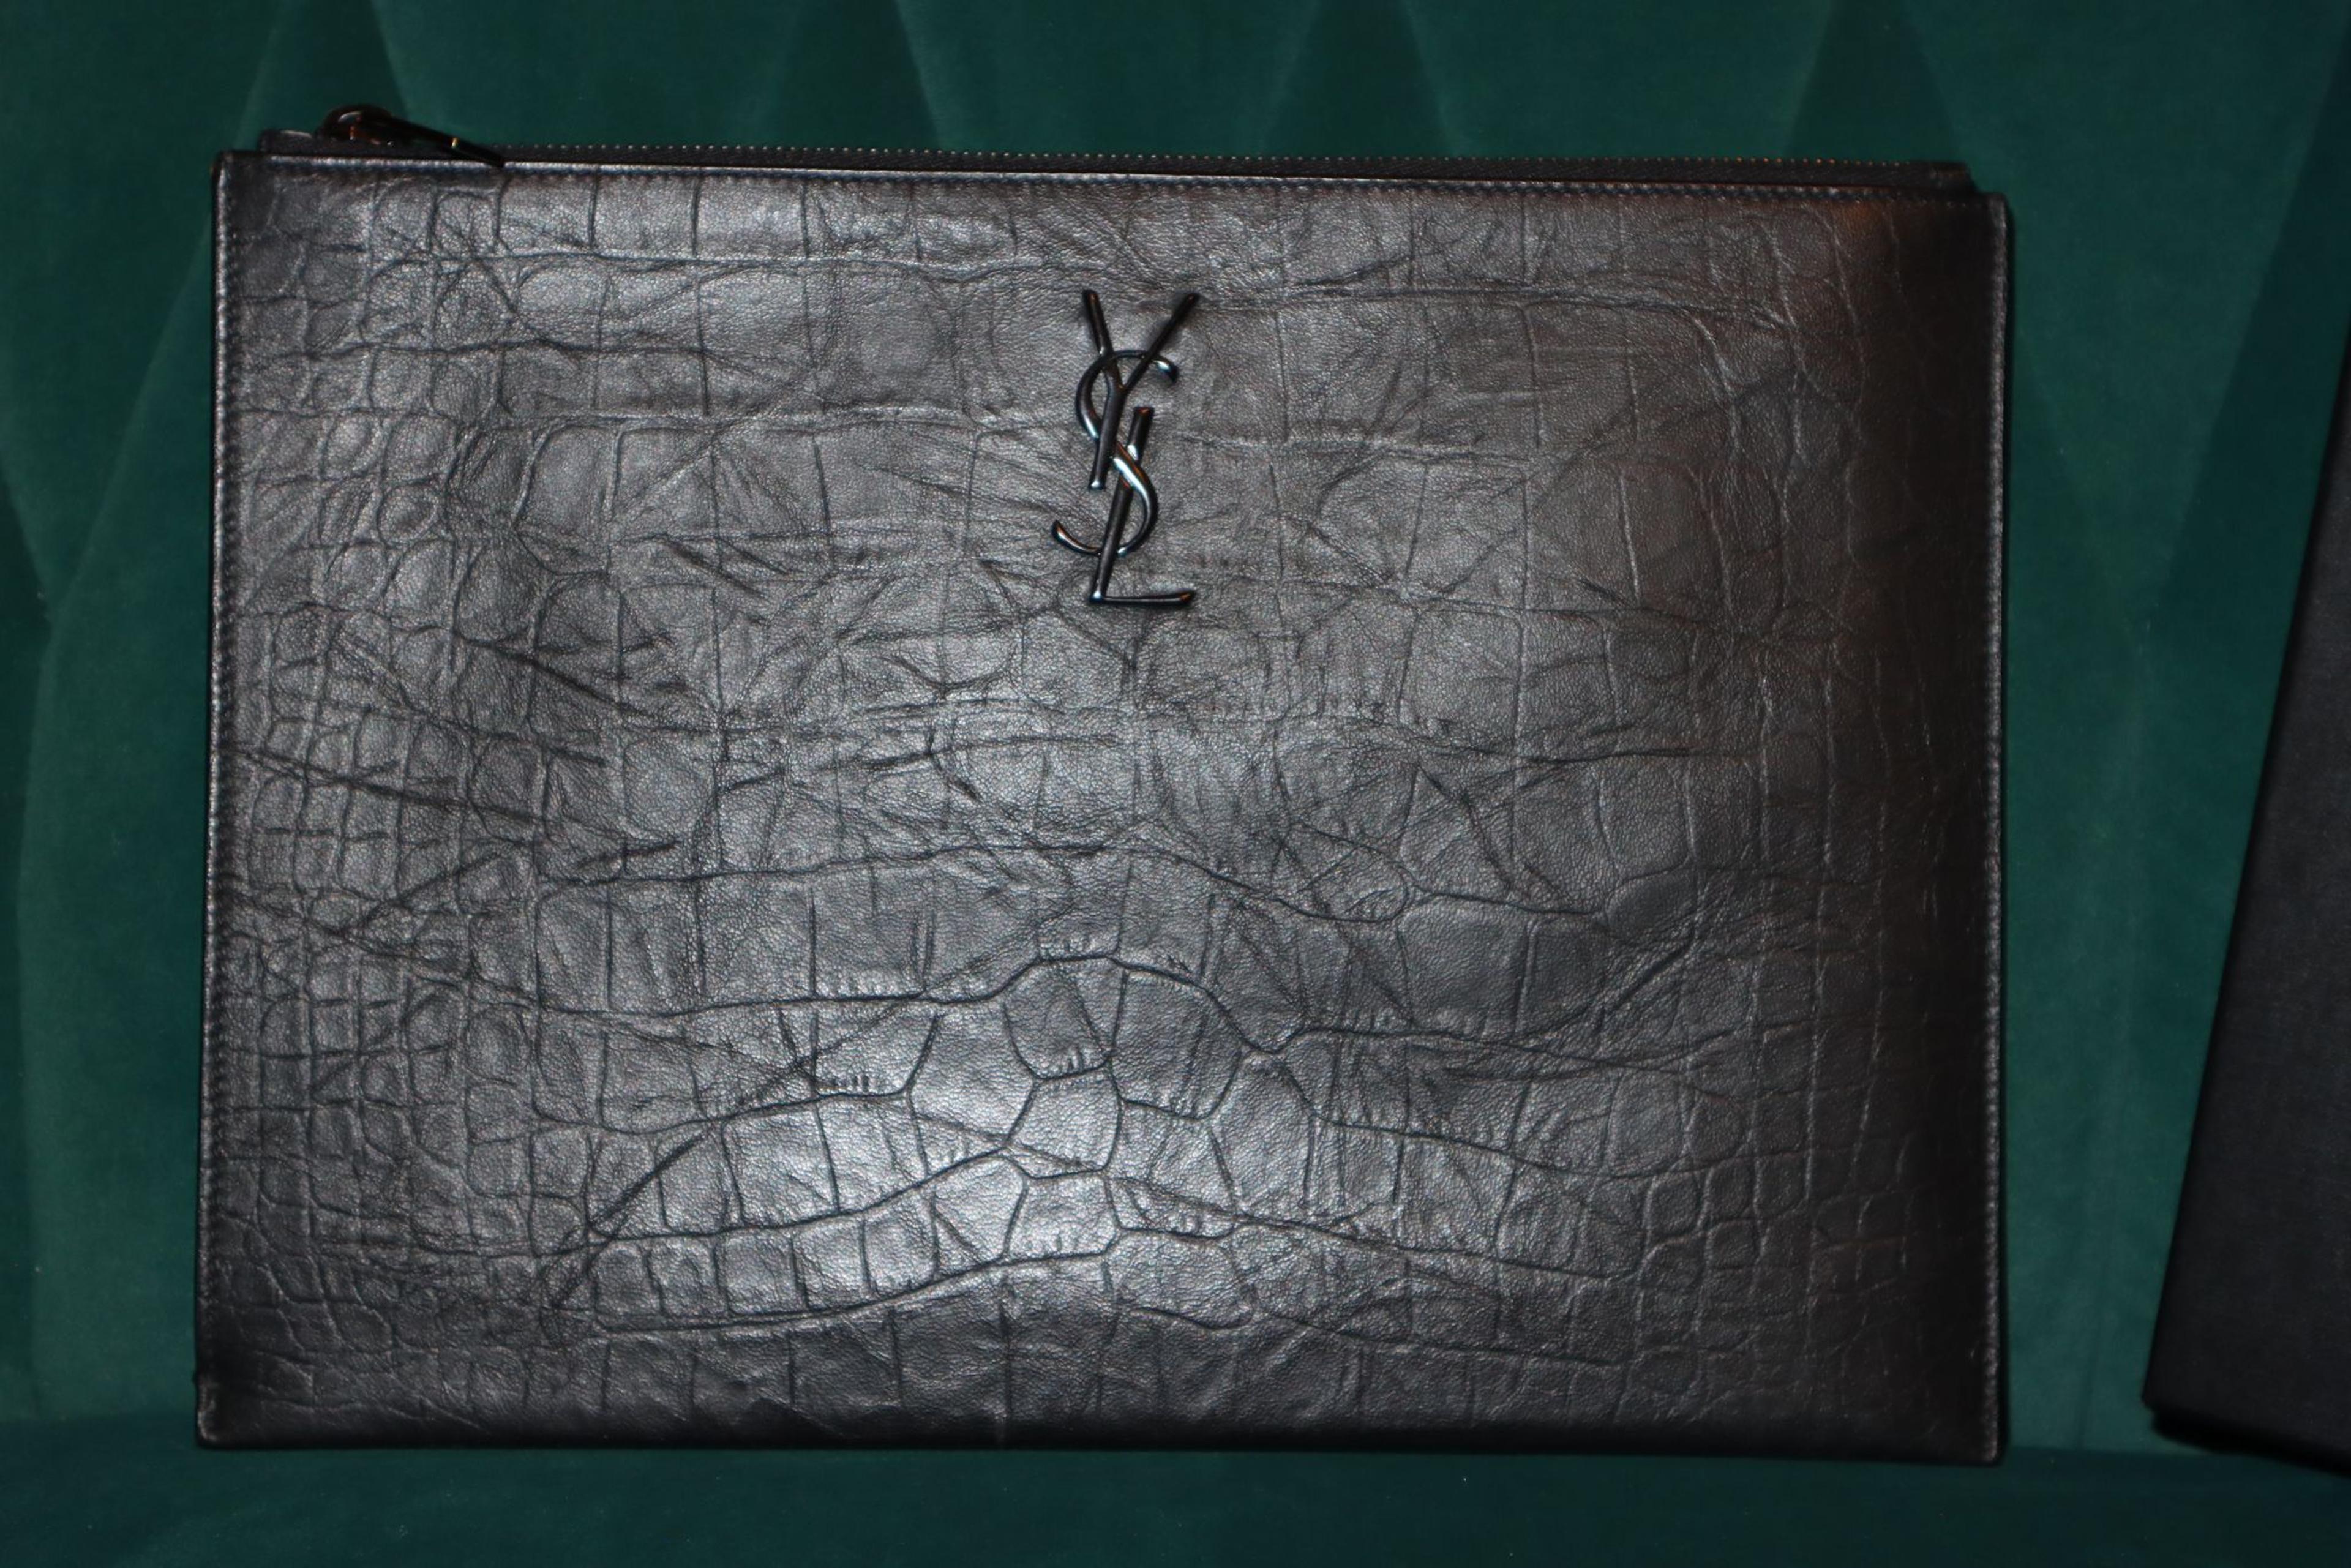 Alternate View 1 of Saint Laurent Black Croc Embossed Leather Monogram Pouch Small